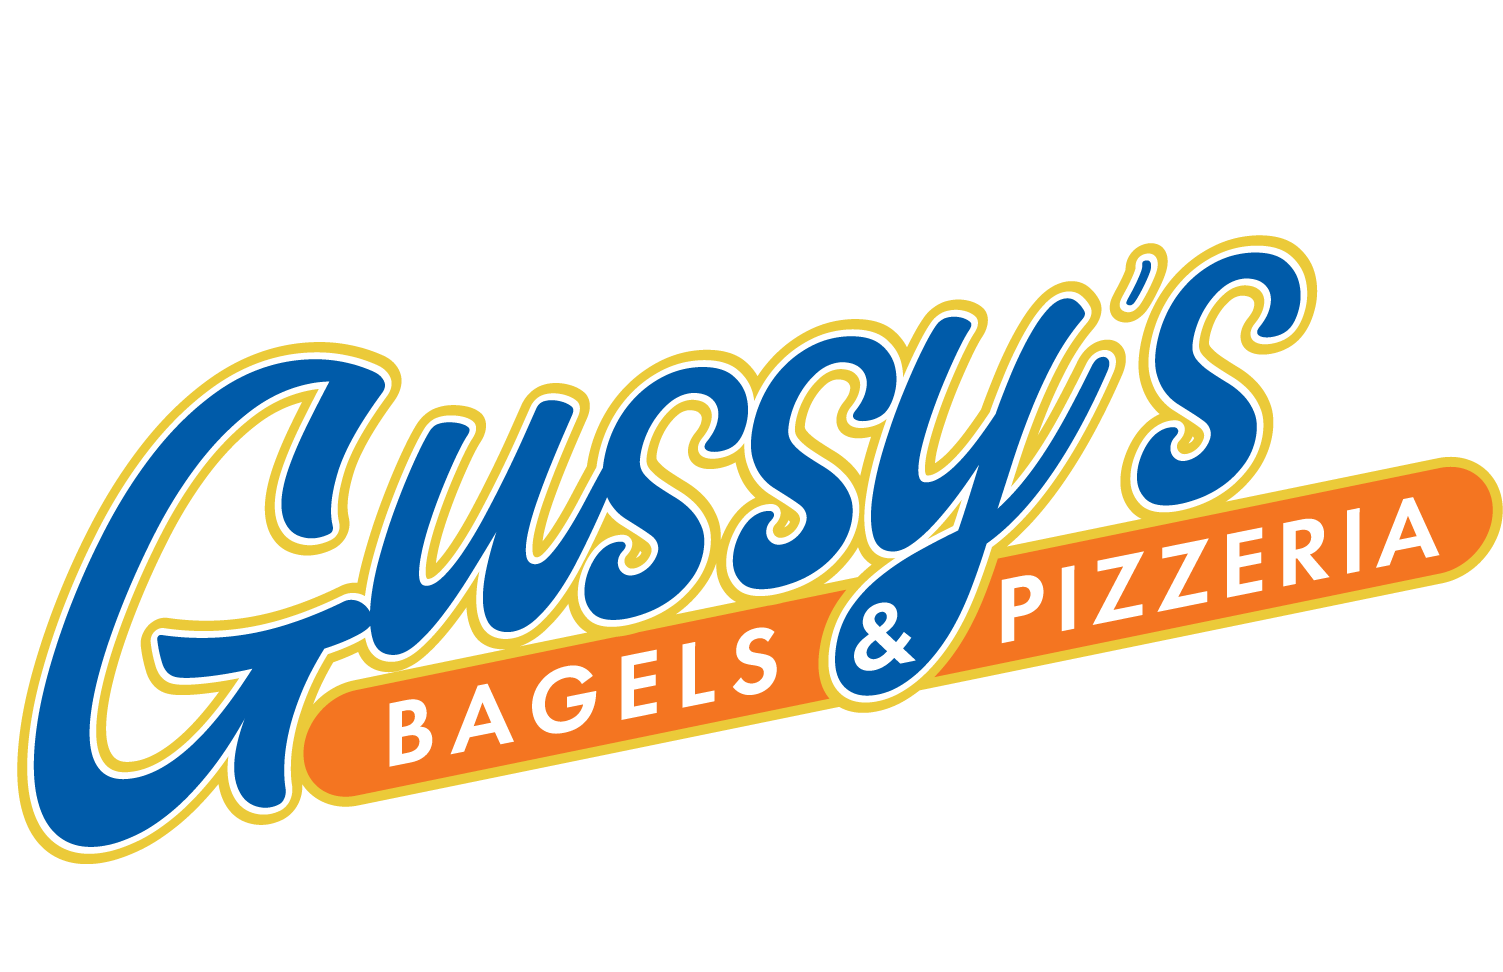 Gussy's Bagels & Deli Home